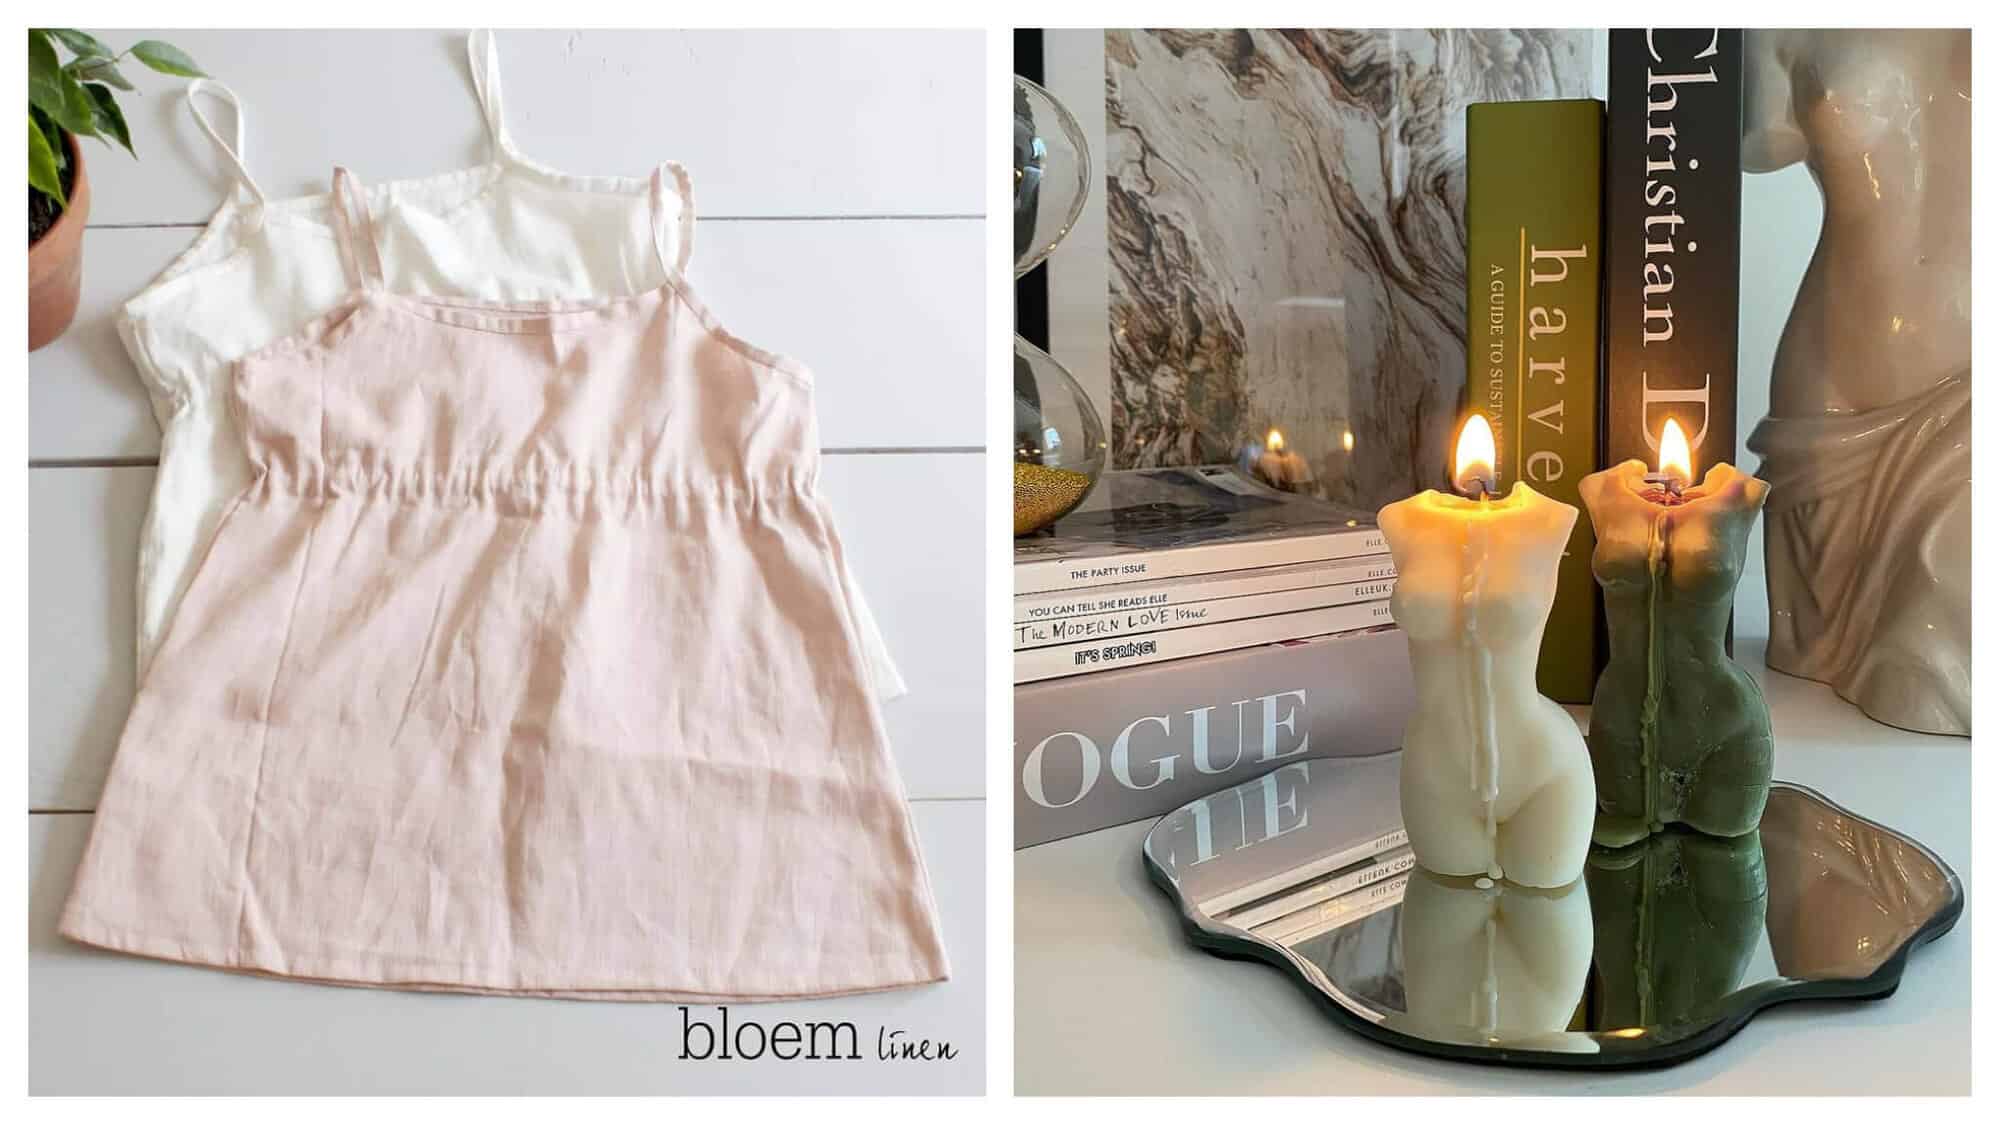 Left: A light pink camisole is on top of a white camisole. They are both laid flat on a white surface, with the logo ‘bloem linen’ in the bottom right corner. / Right: Two candles in the shape of a bust of a woman are lit. They are resting on a mirrored surface, with decorative books and magazines behind them, including Vogue magazines, and a book titled Christian Dior.